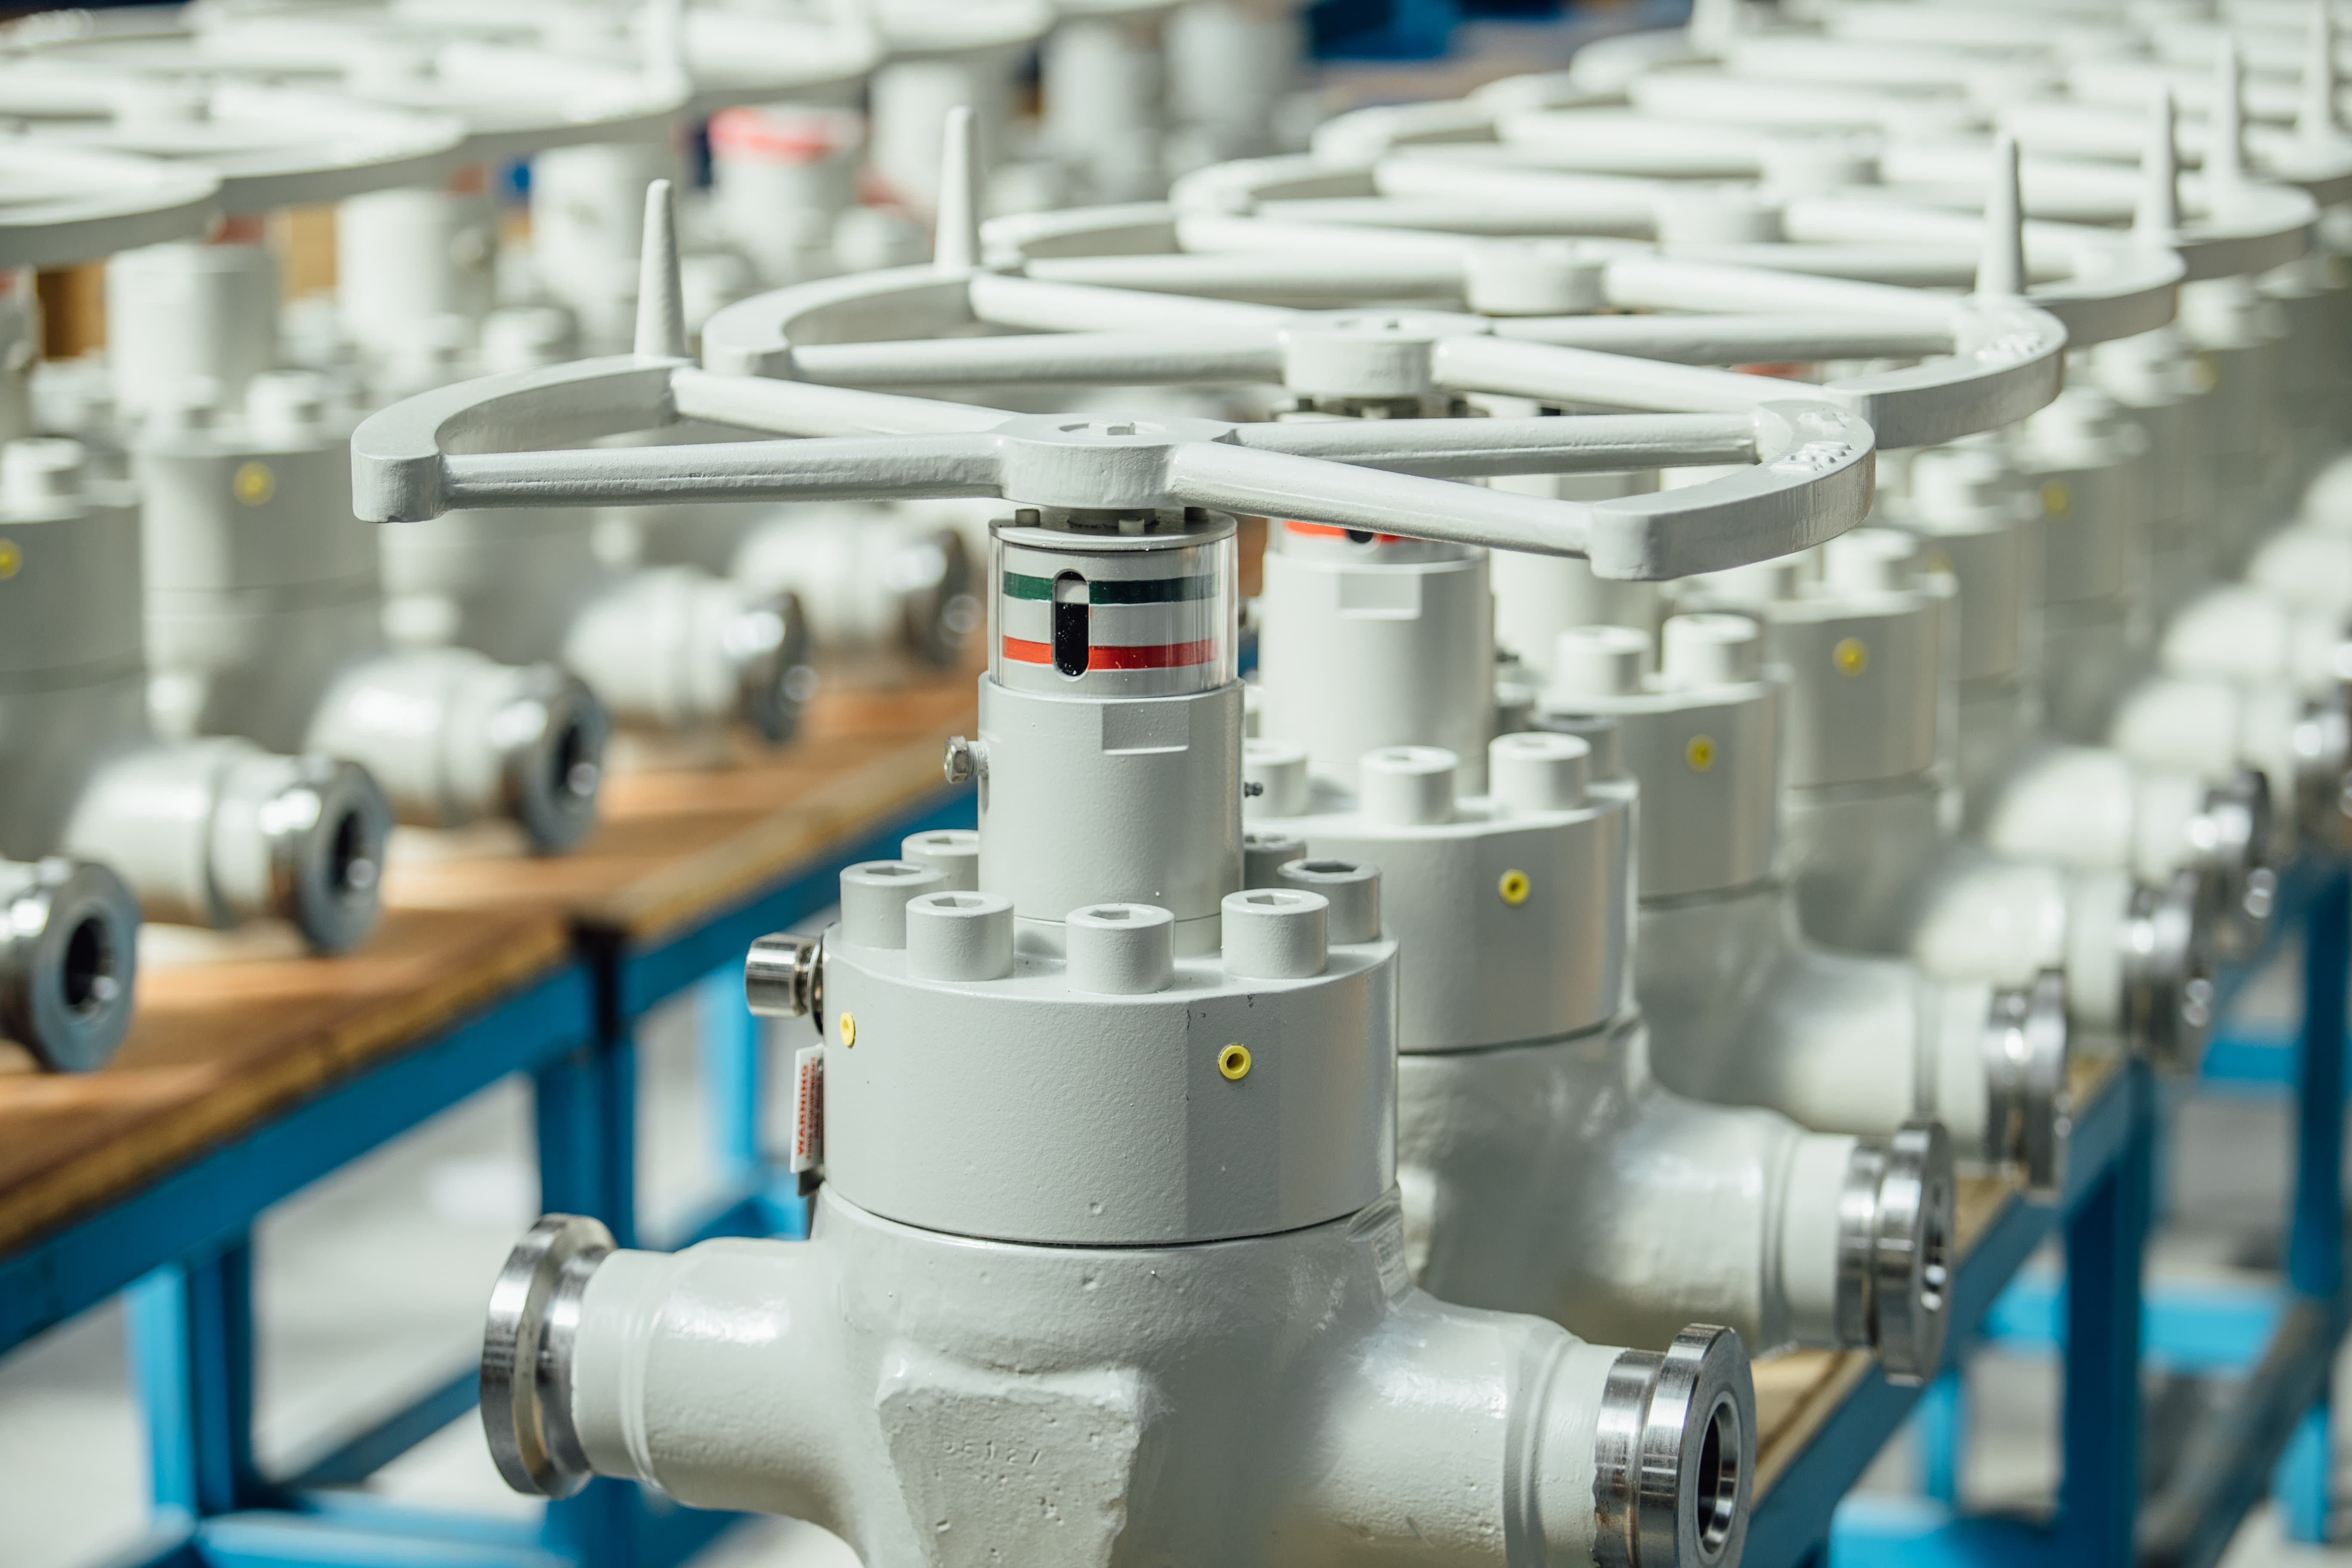 rows of valves